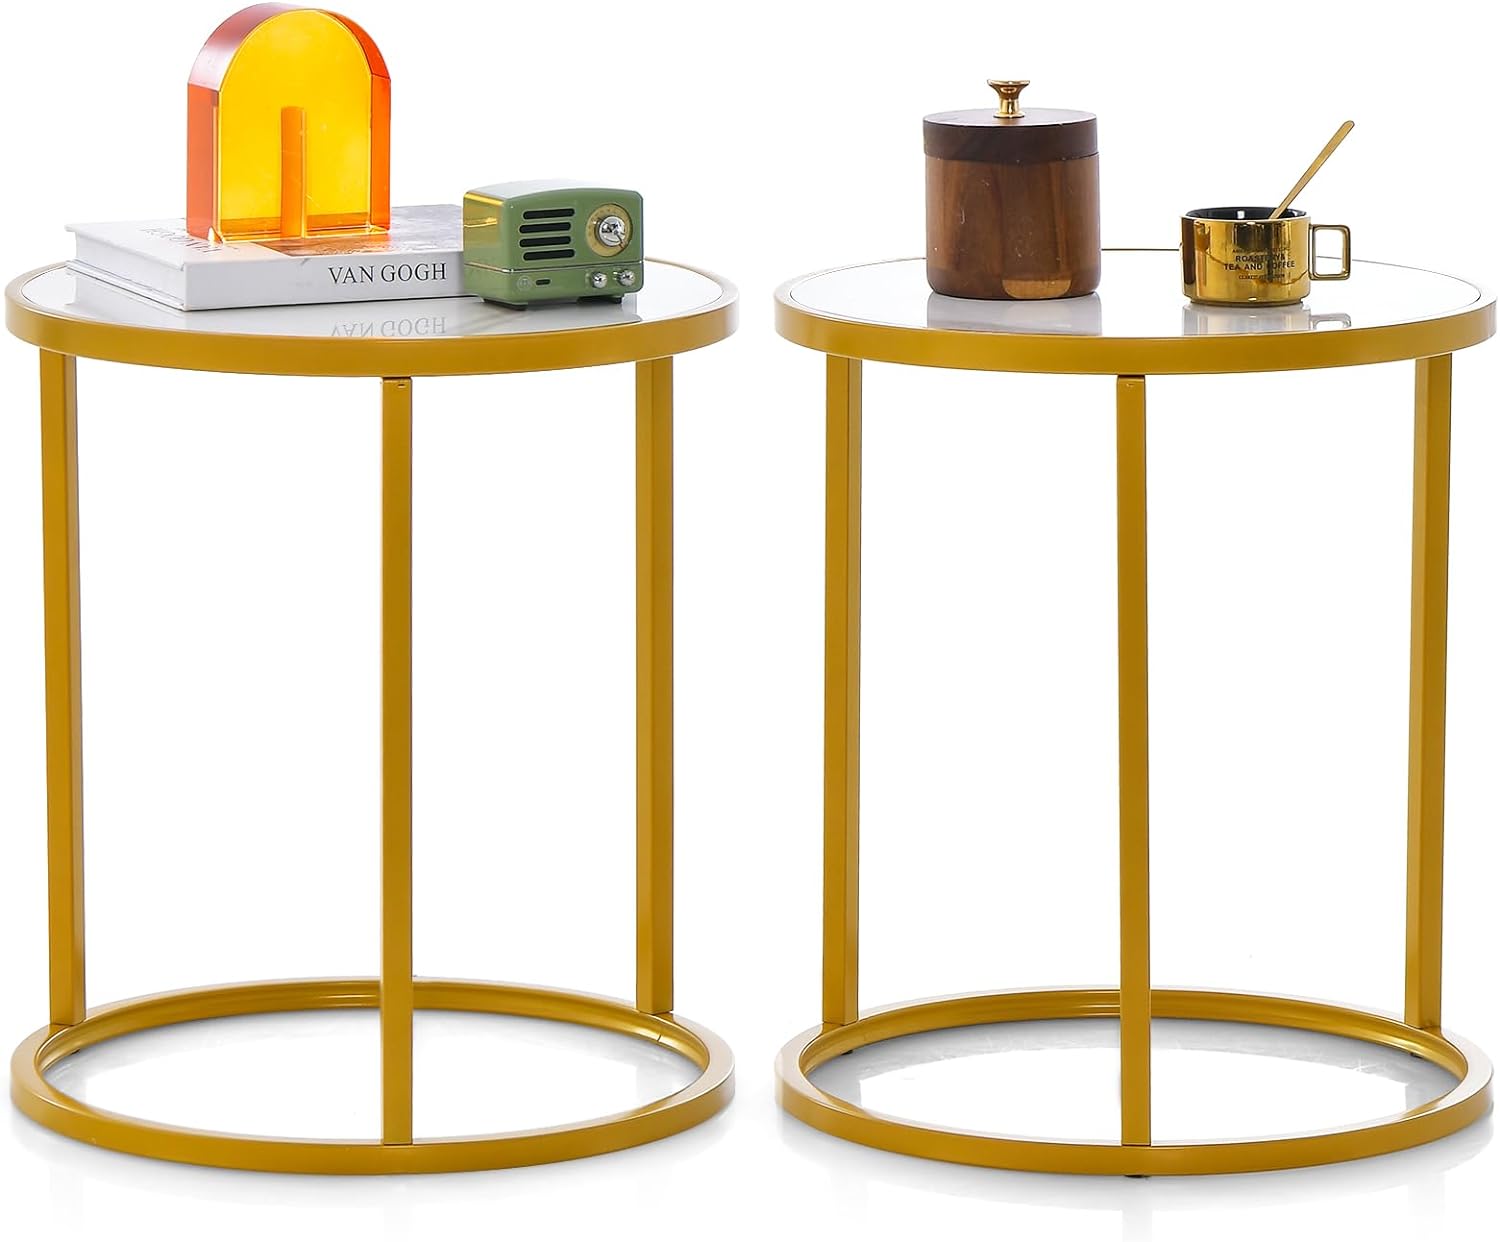 Giantex Faux Marble Side Table, Round End Table with Golden Metal Frame and White Marble Top